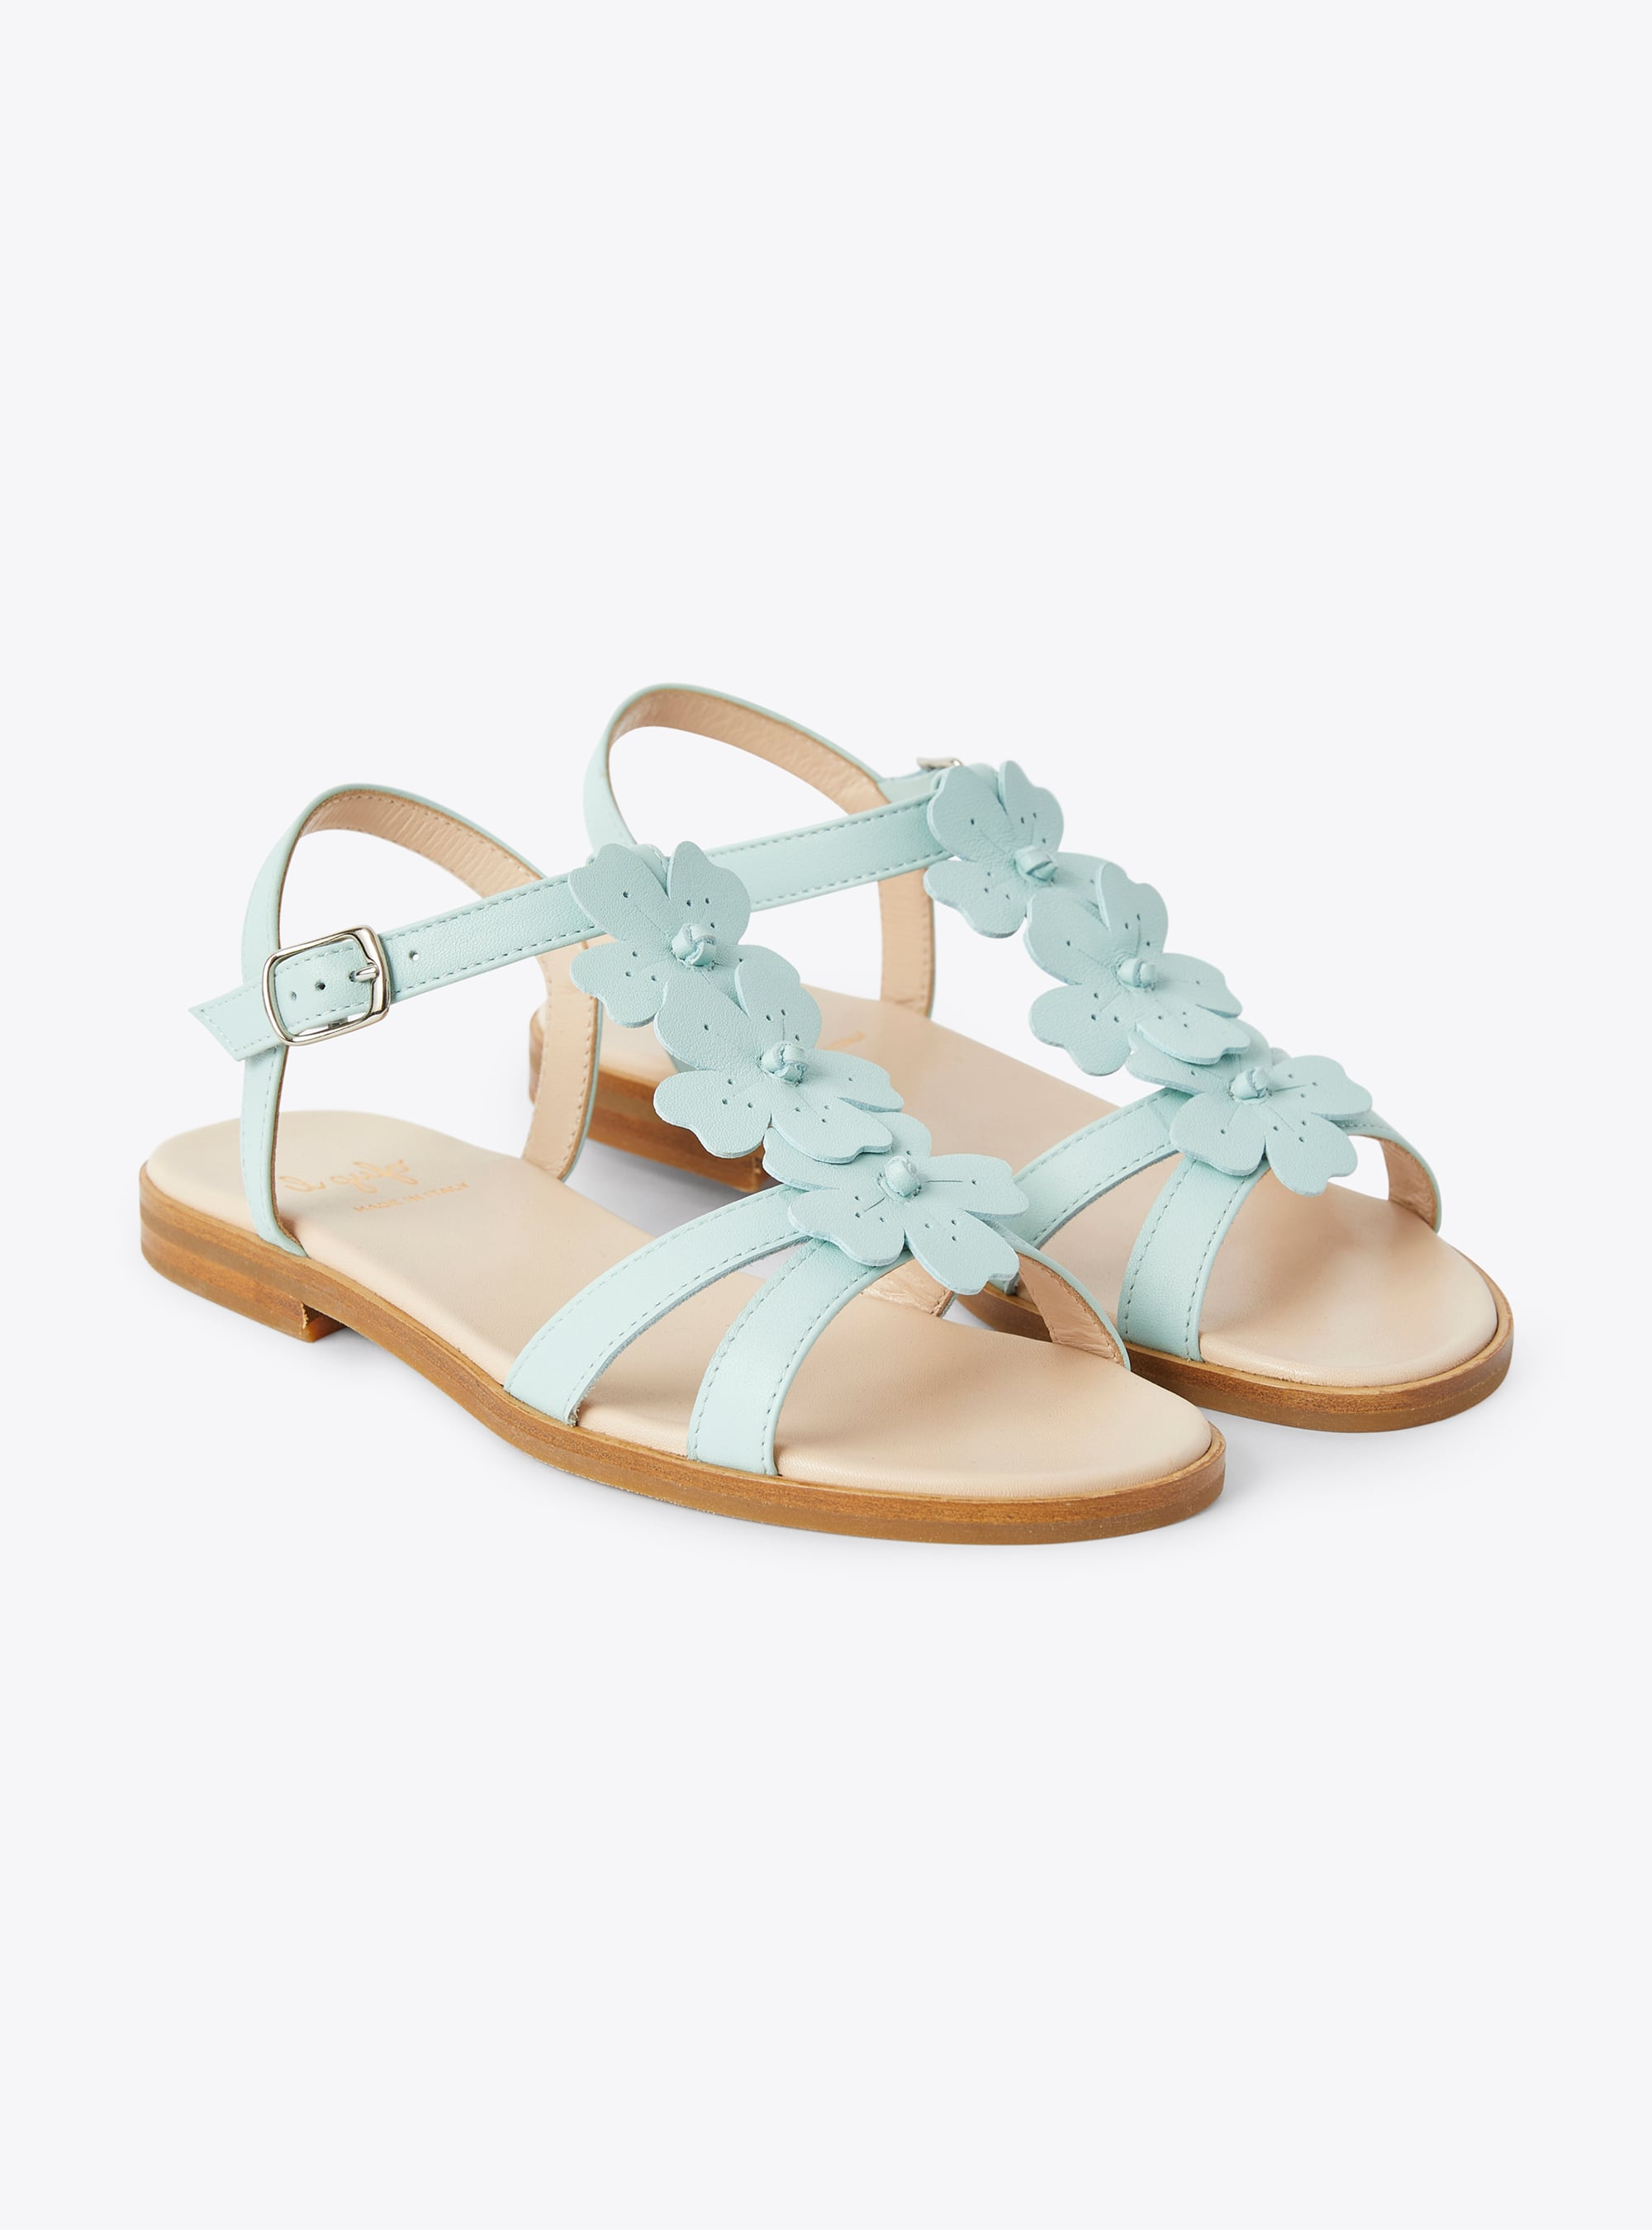 Leather sandal with flower embellishment in sea green - Shoes - Il Gufo